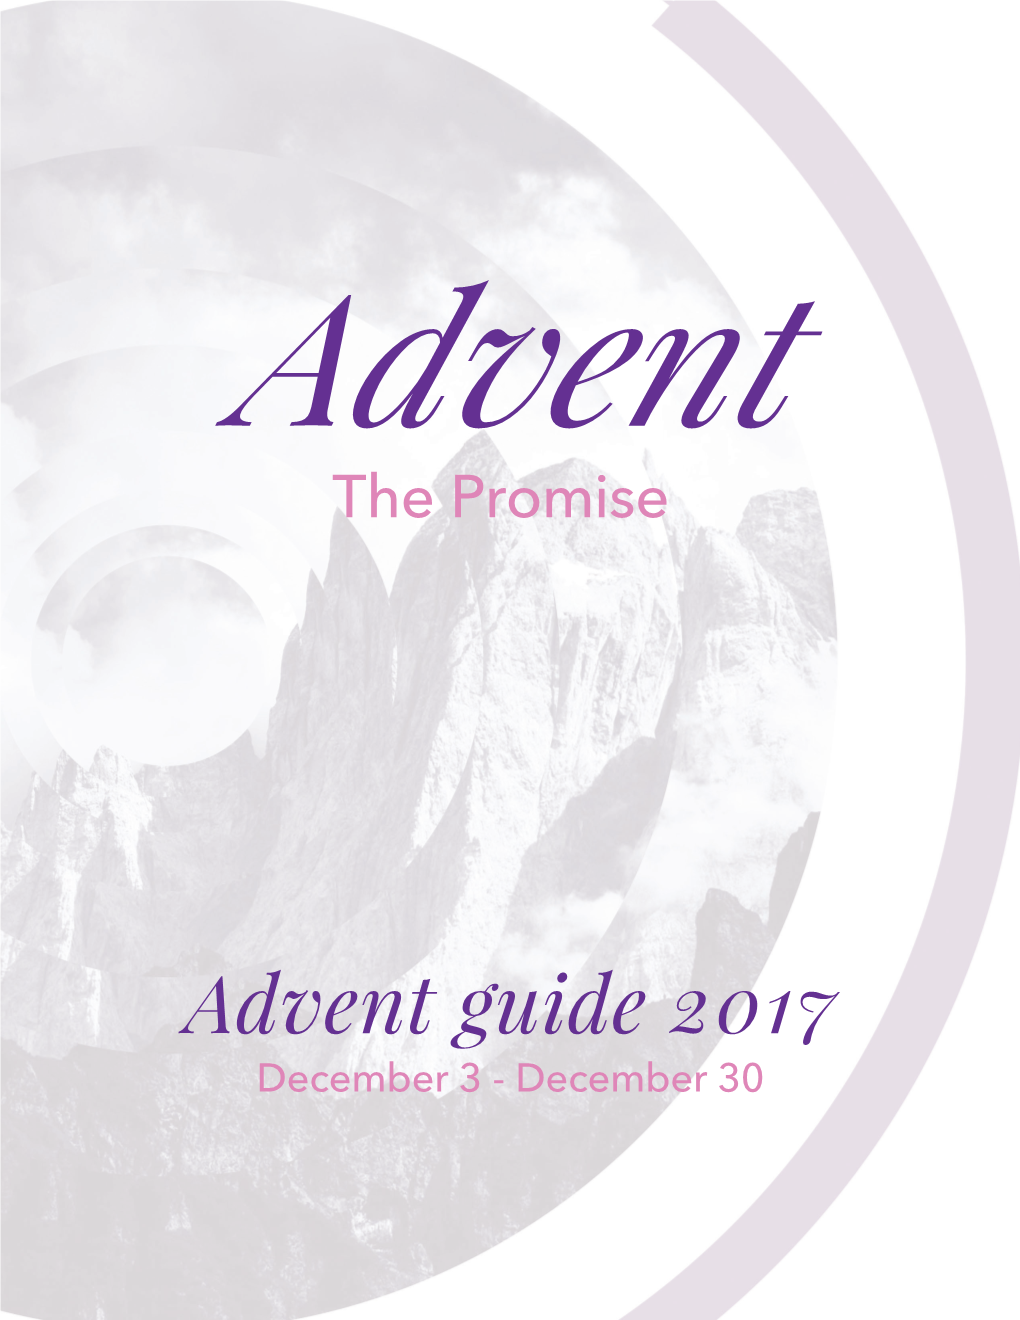 Advent Guide 2017